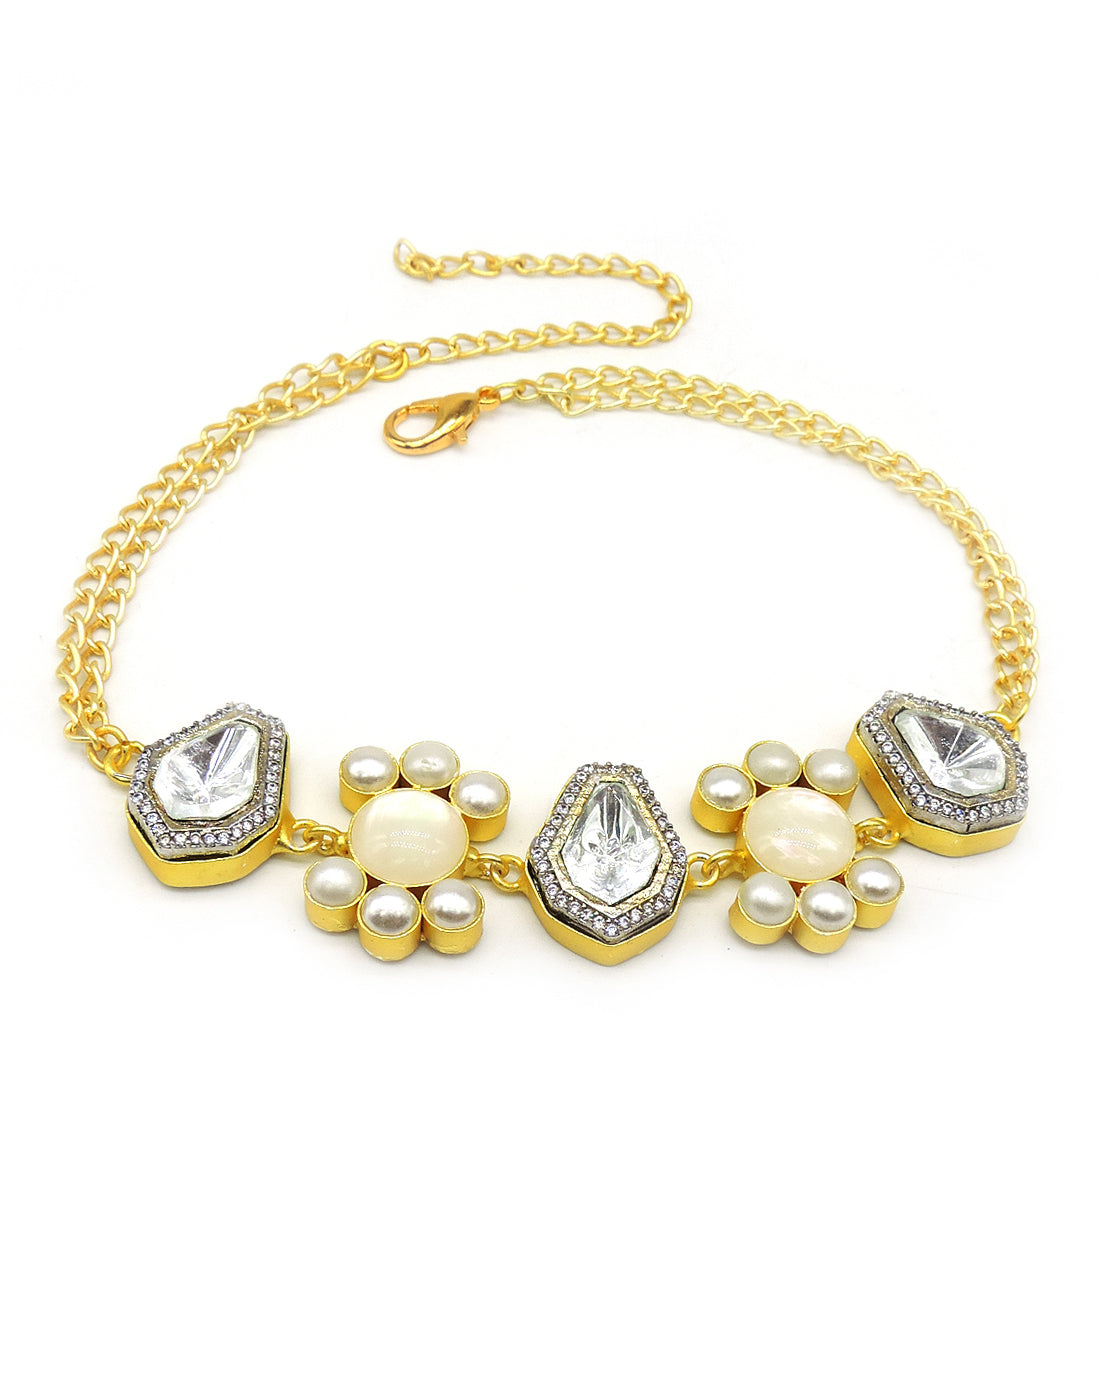 Flower & Crystal Necklace - Statement Necklaces - Gold-Plated & Hypoallergenic Jewellery - Made in India - Dubai Jewellery - Dori